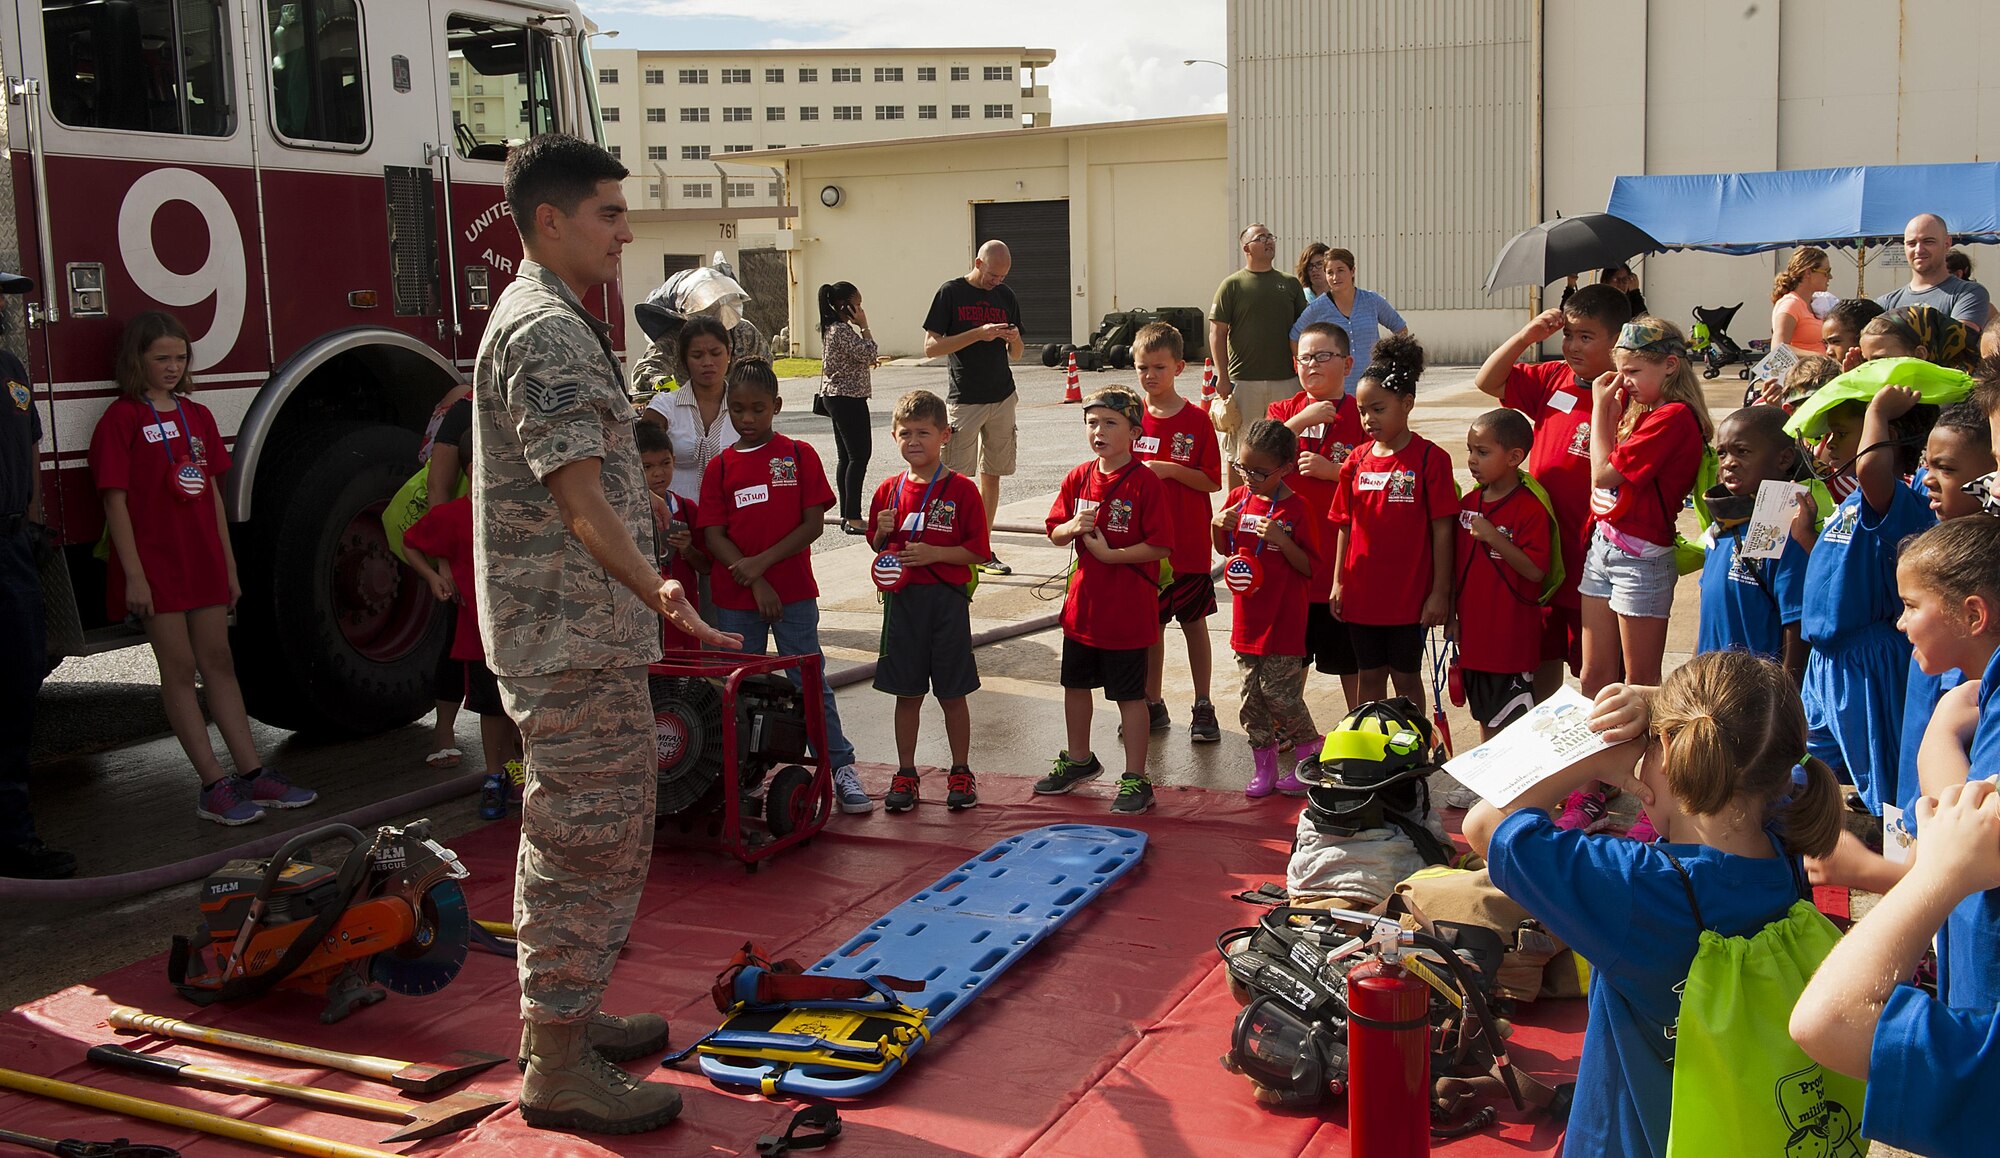 U.S. Air Force Staff Sgt. Juan Duarte, 18th Civil Engineer Squadron firefighter, teaches children about the different equipment that firefighters use on the job at Skoshi Warrior Nov. 14, 2015, at Kadena Air Base, Japan. This event helps military children understand what their parents go through while deploying and day-to-day operations by giving them a hands-on experience at some of the tasks military members go through. (U.S. Air Force photo by Airman 1st Class Corey M. Pettis/Released)